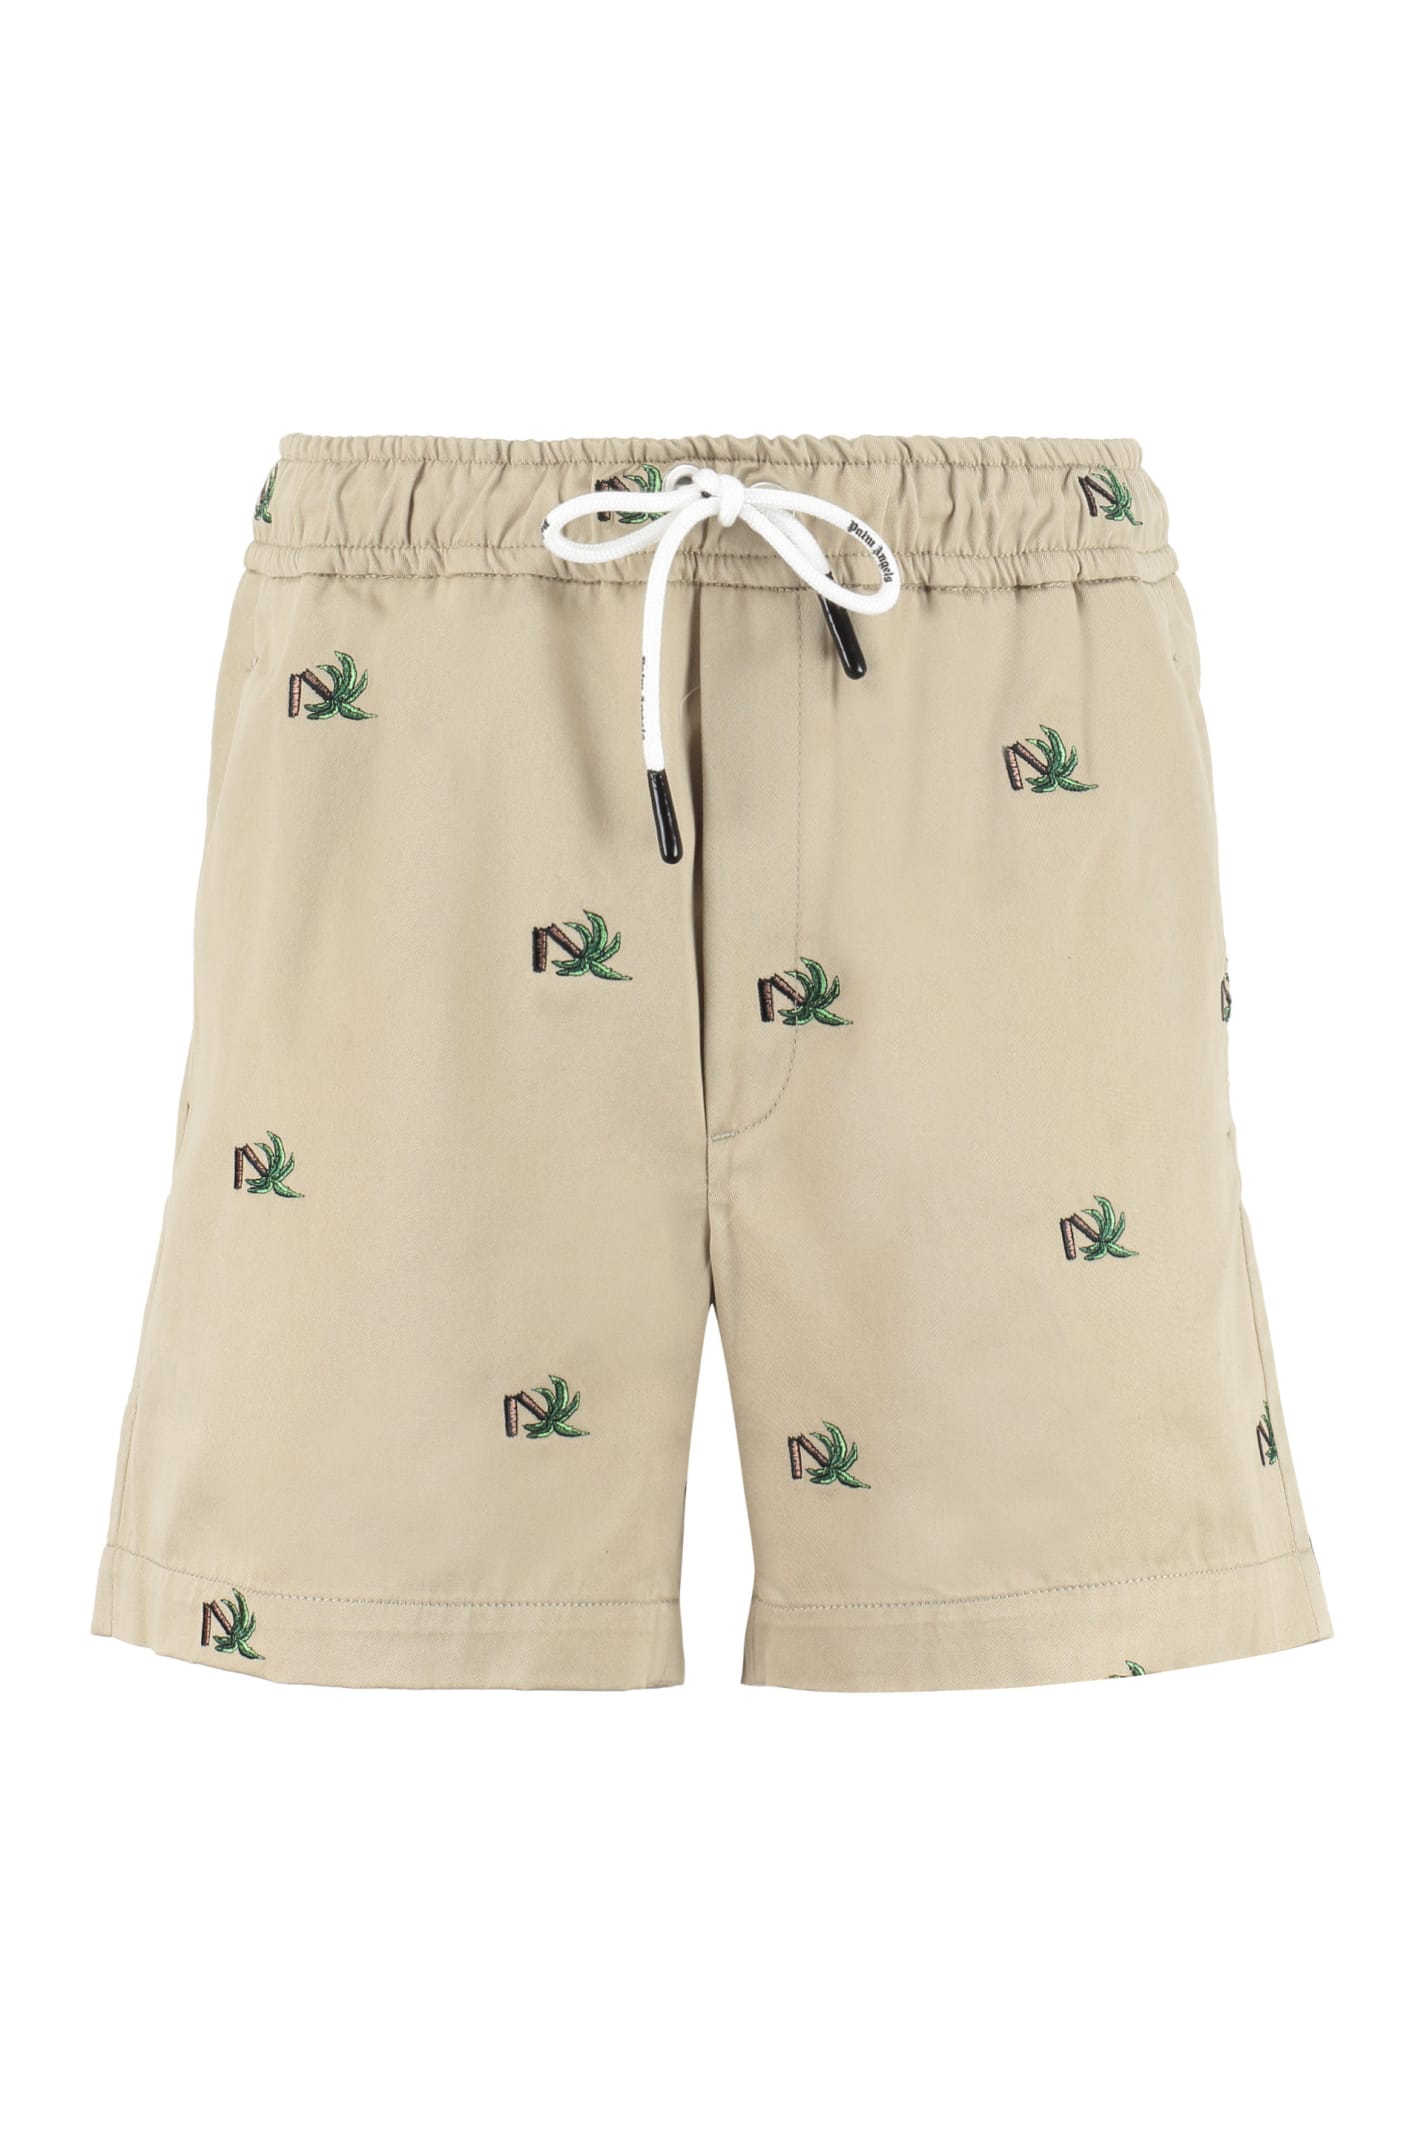 Palm Angels Embroidered Cotton Bermuda Shorts